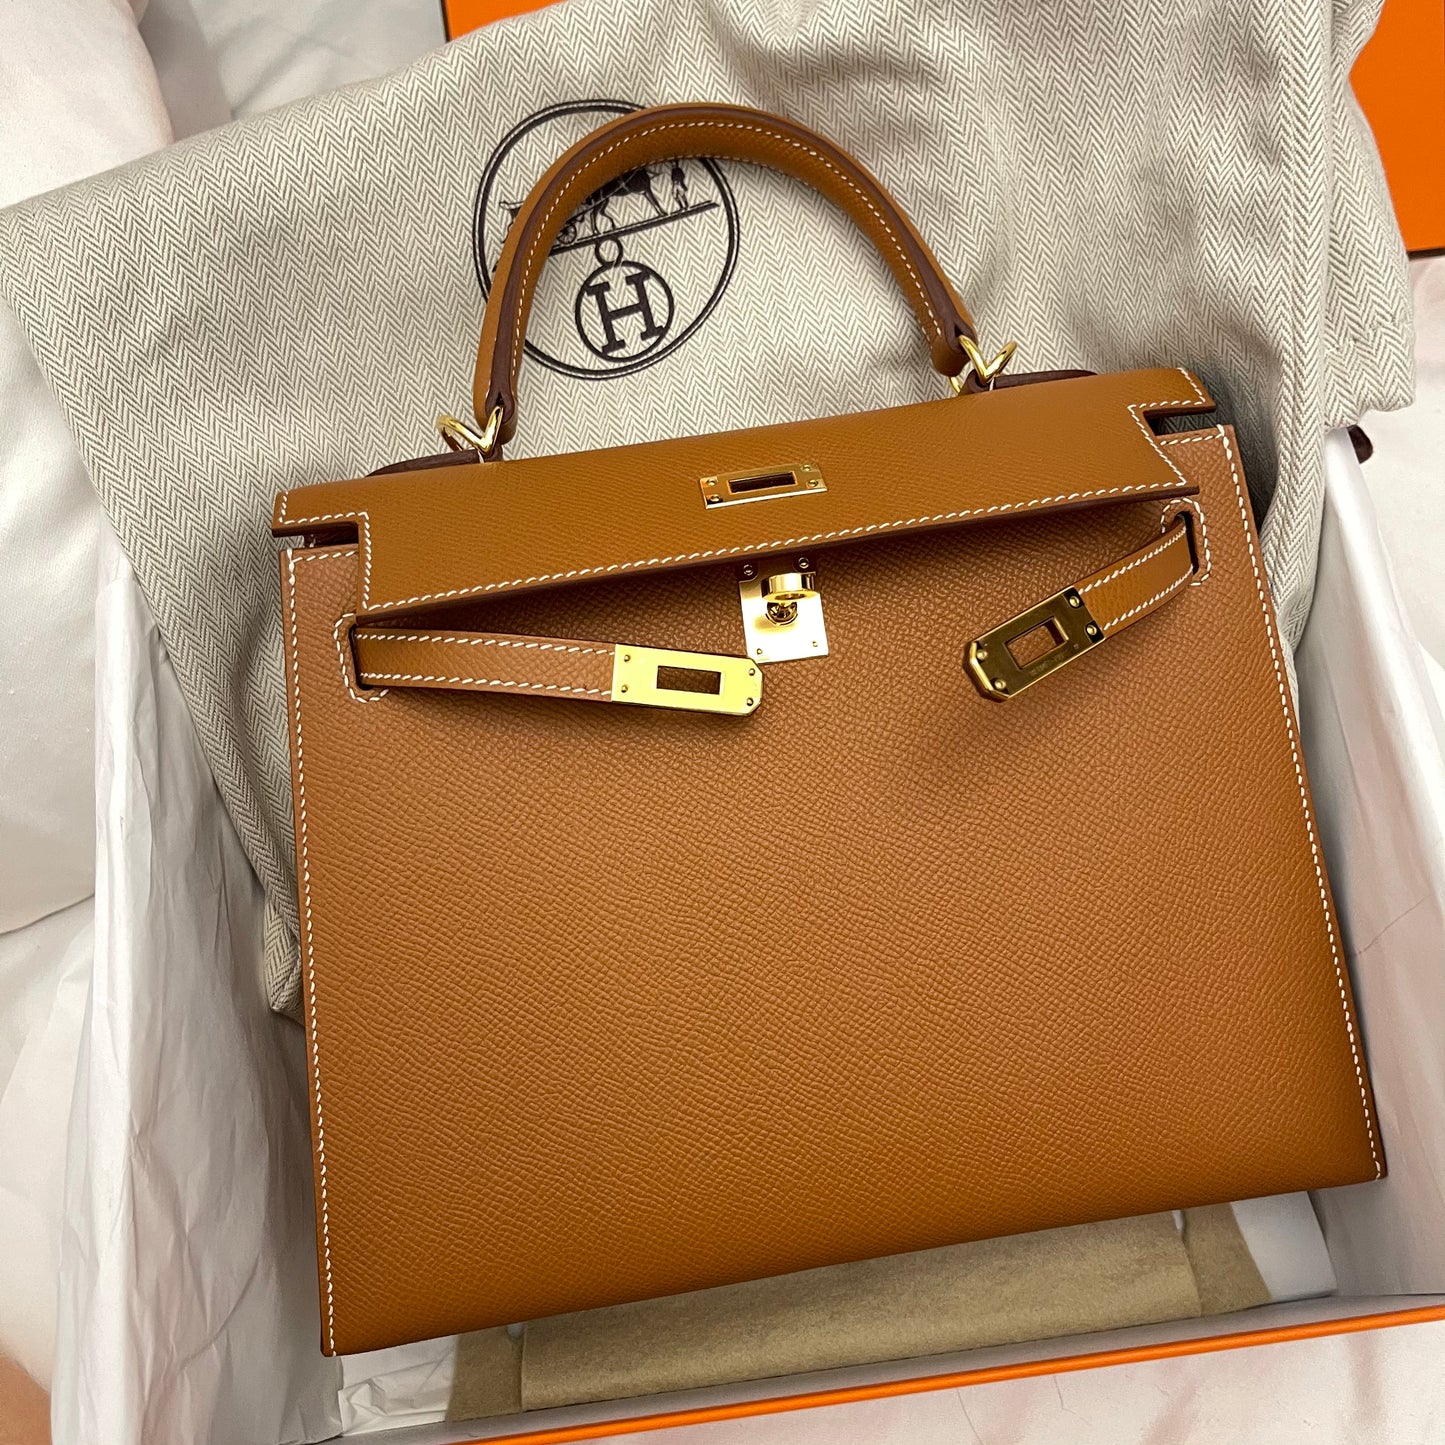 Lets unbox this Hermès Kelly 25 Sellier in structured Epsom leather 🙌